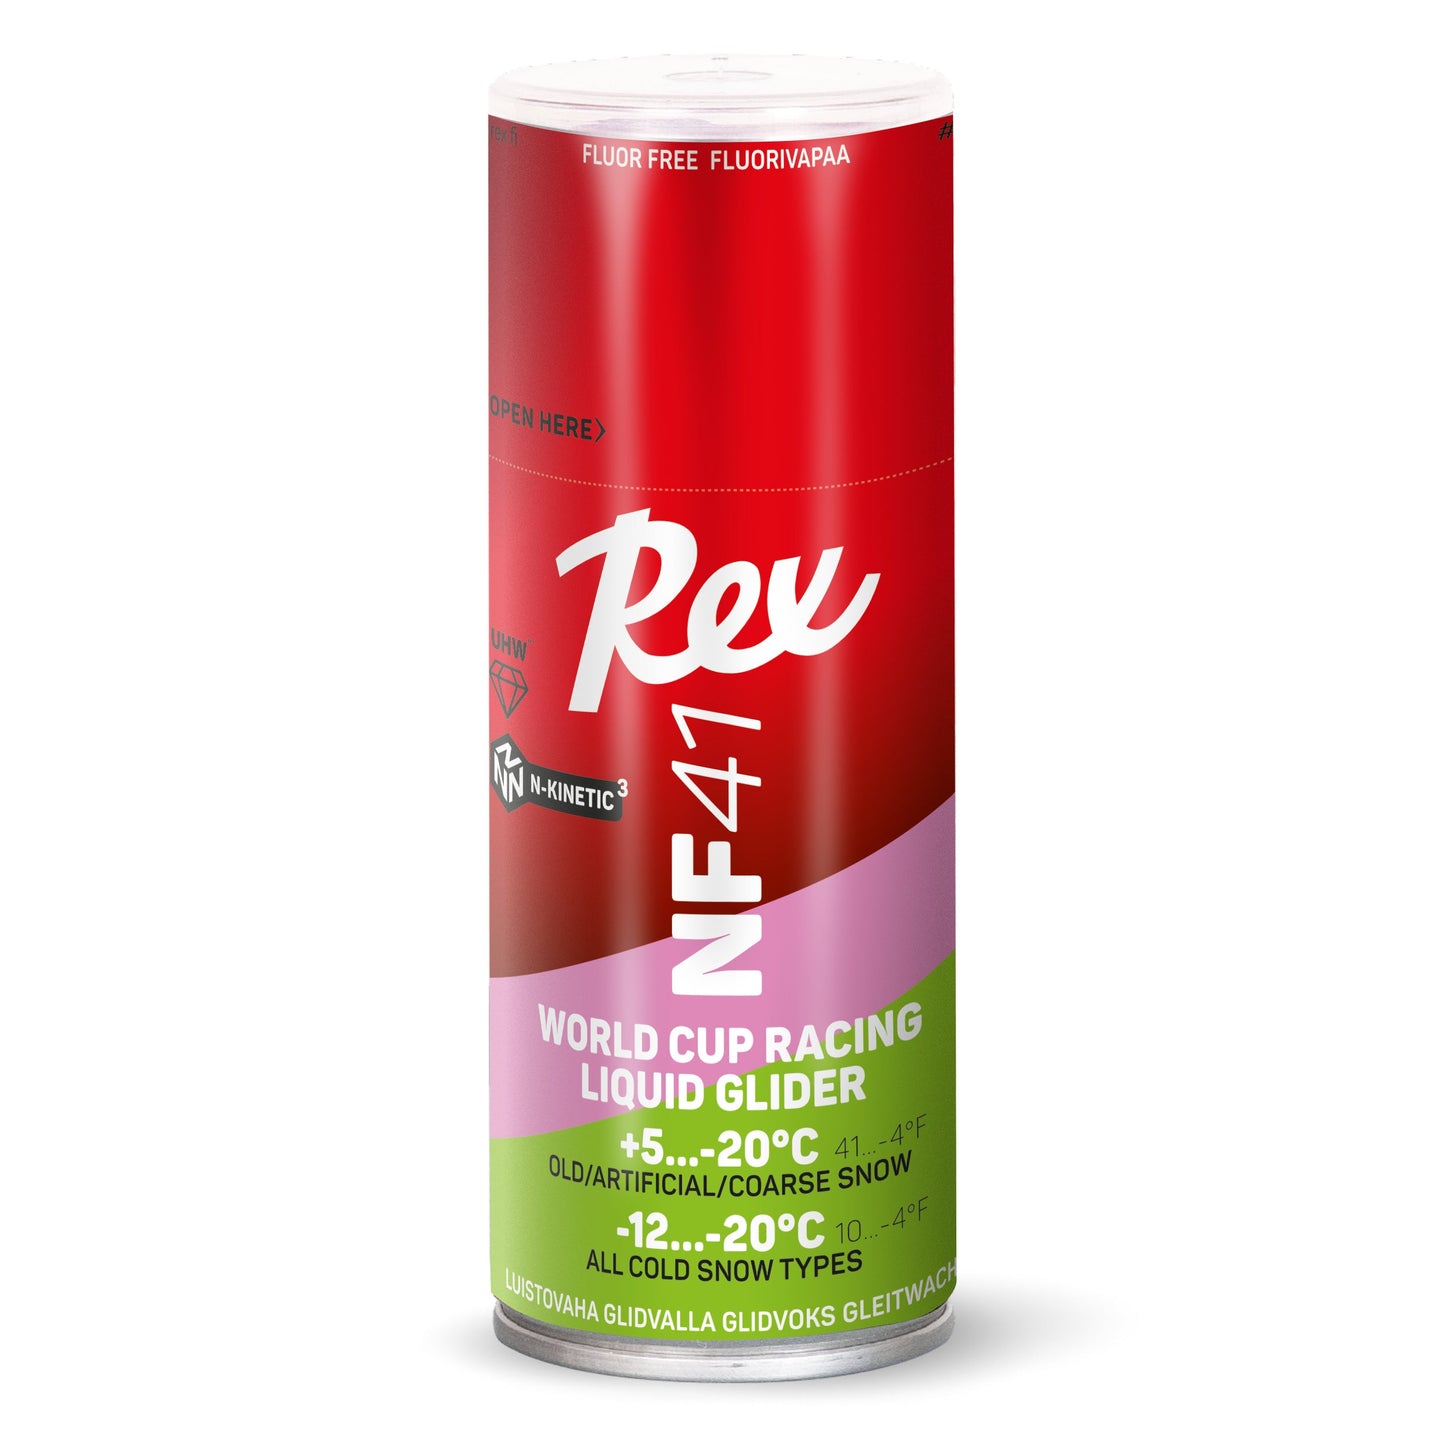 A product picture of the Rex Wax NF41 Pink/Green UHW Liquid Glider